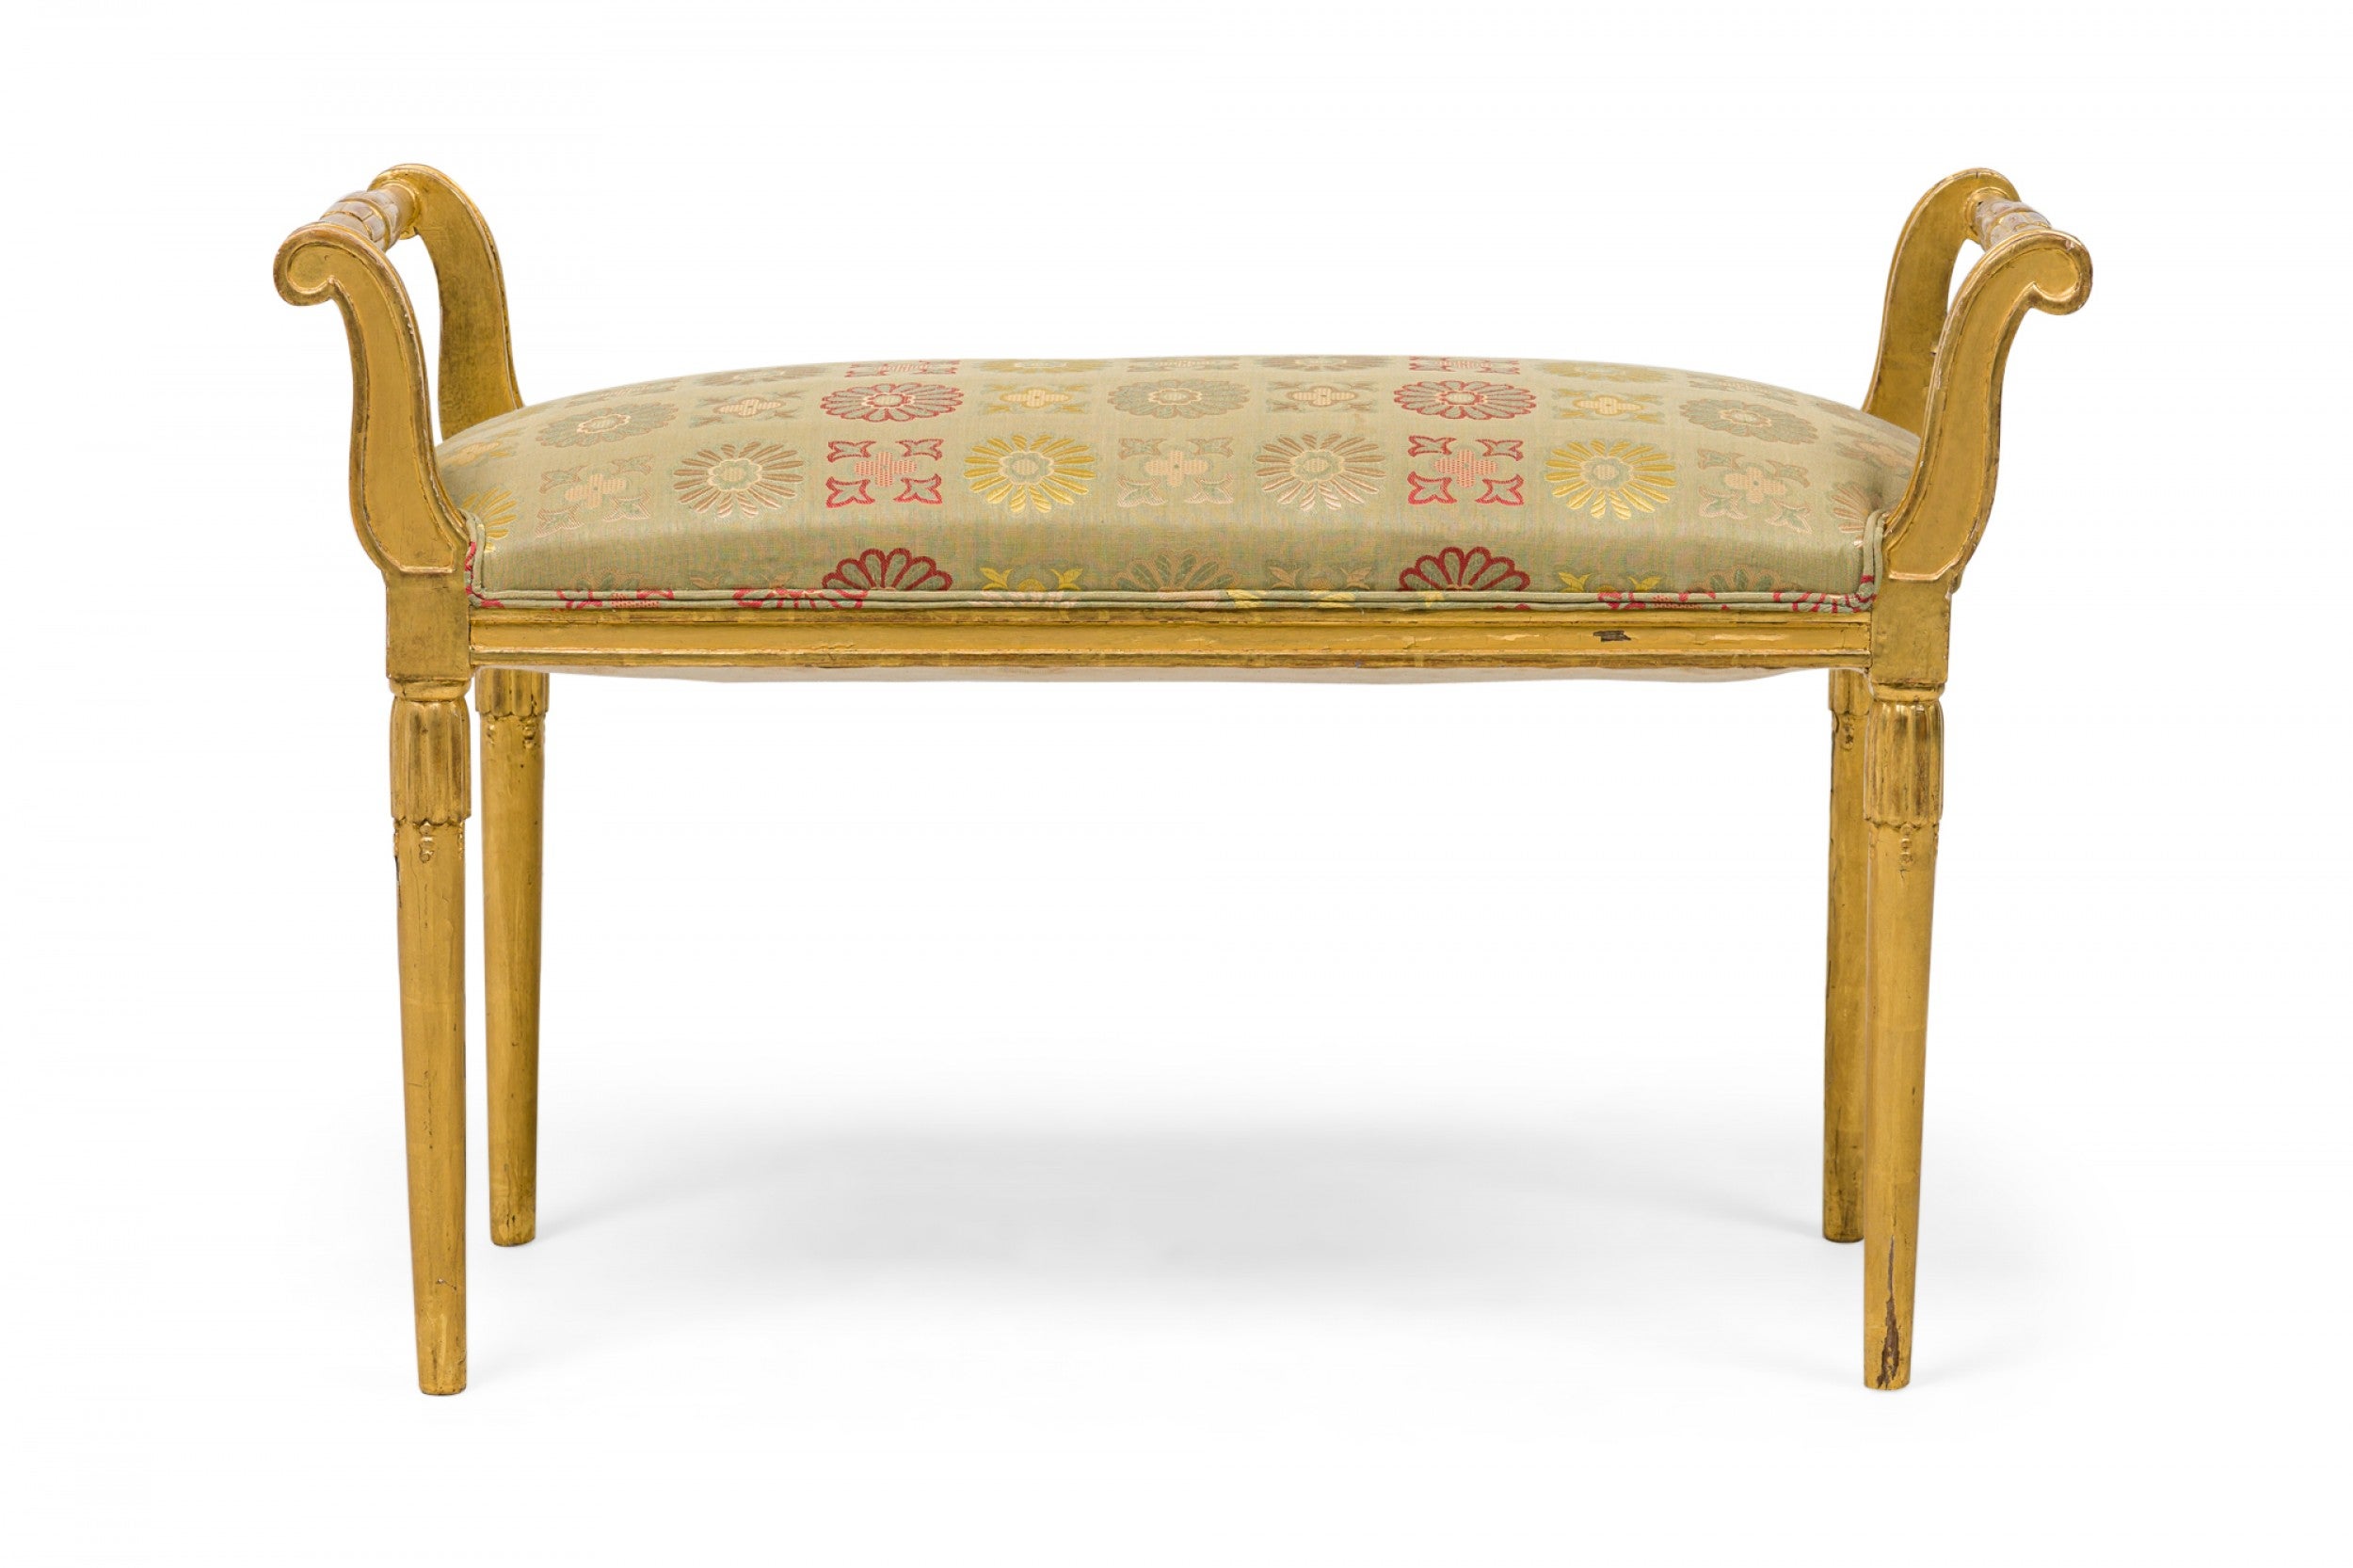 Sue et Mare French Art Deco Giltwood Upholstered Bench For Sale